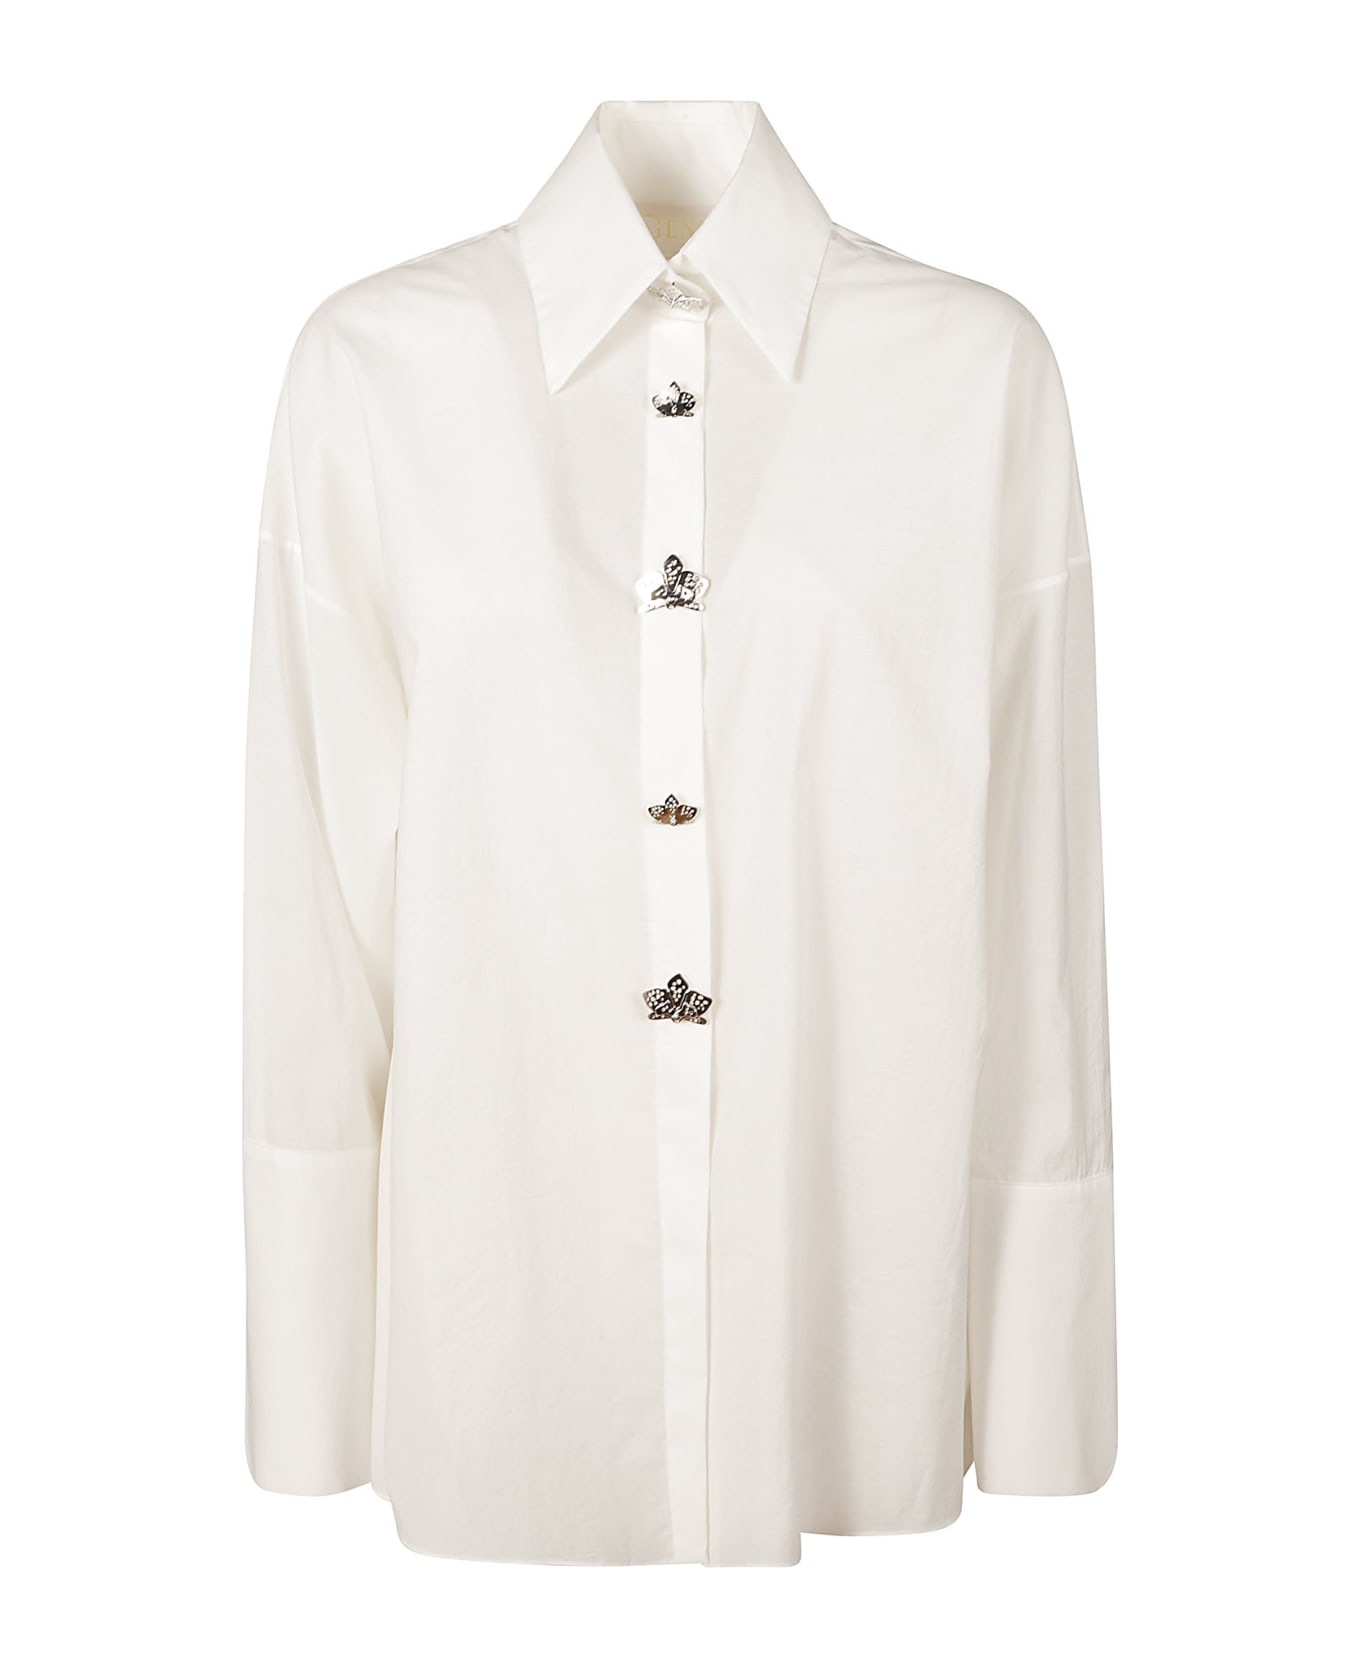 Genny Crown Buttons Plain Formal Shirt - White シャツ